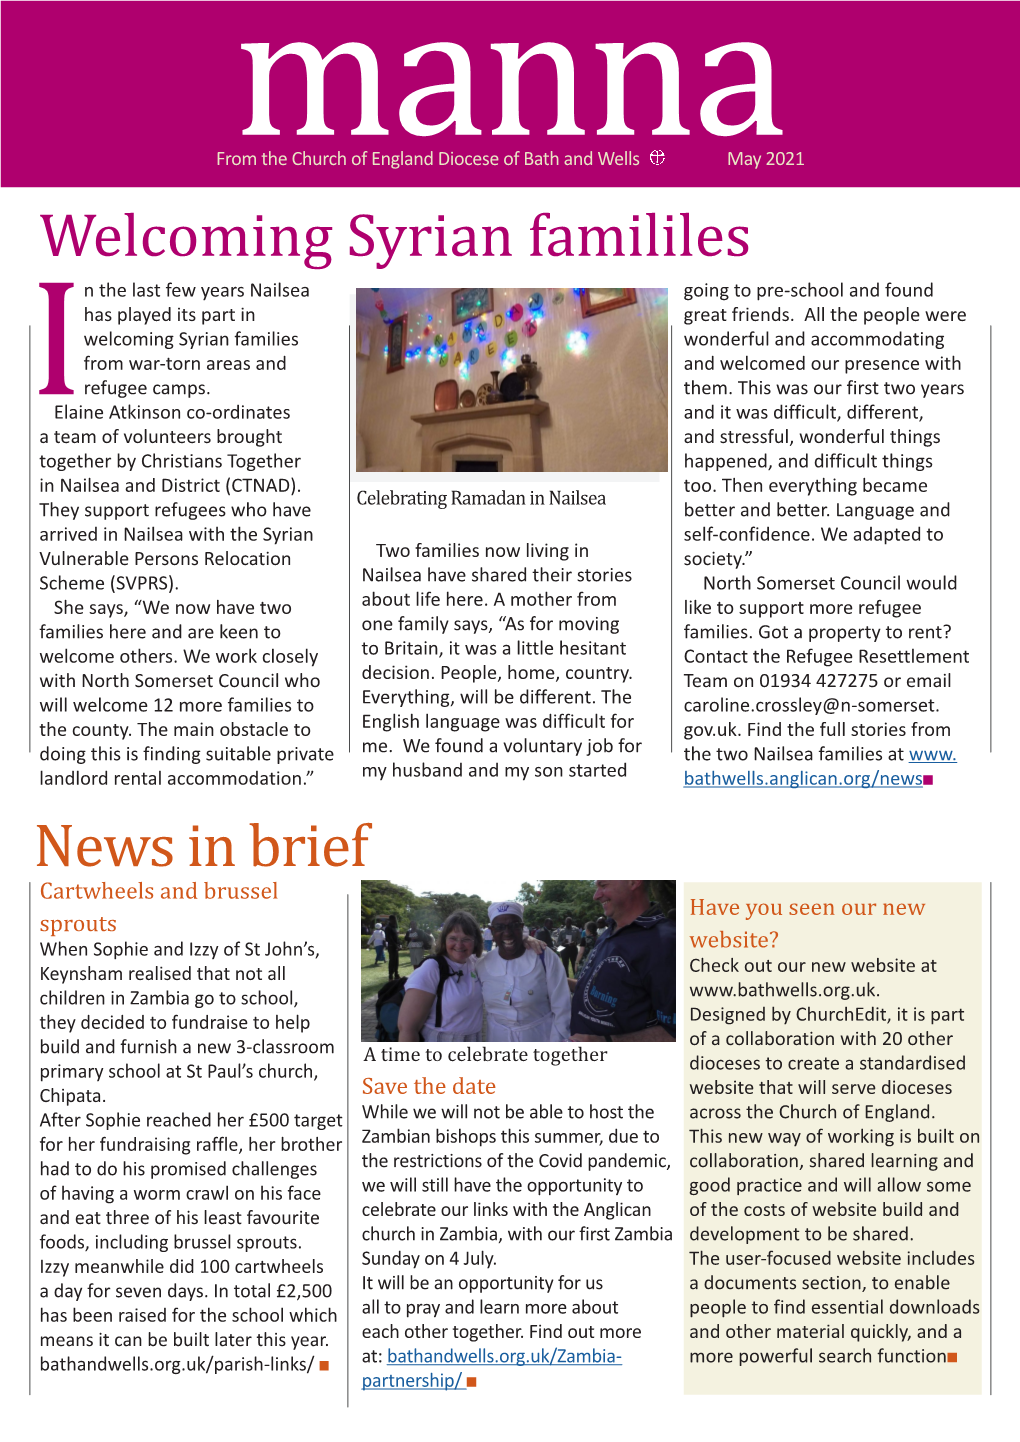 Welcoming Syrian Famililes News in Brief